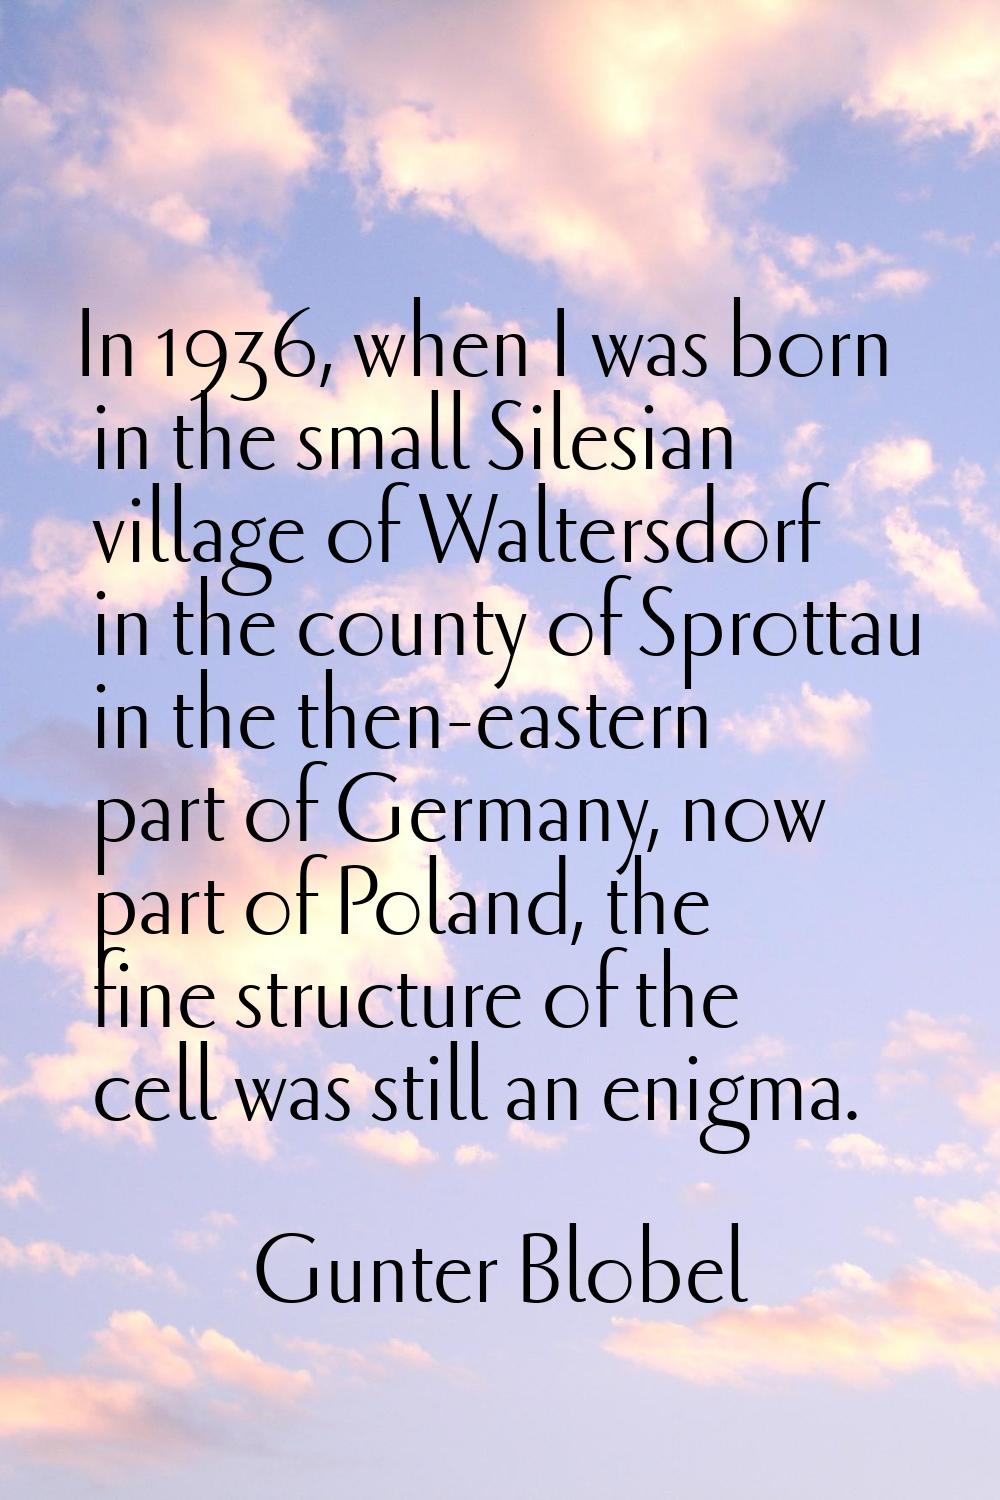 In 1936, when I was born in the small Silesian village of Waltersdorf in the county of Sprottau in 